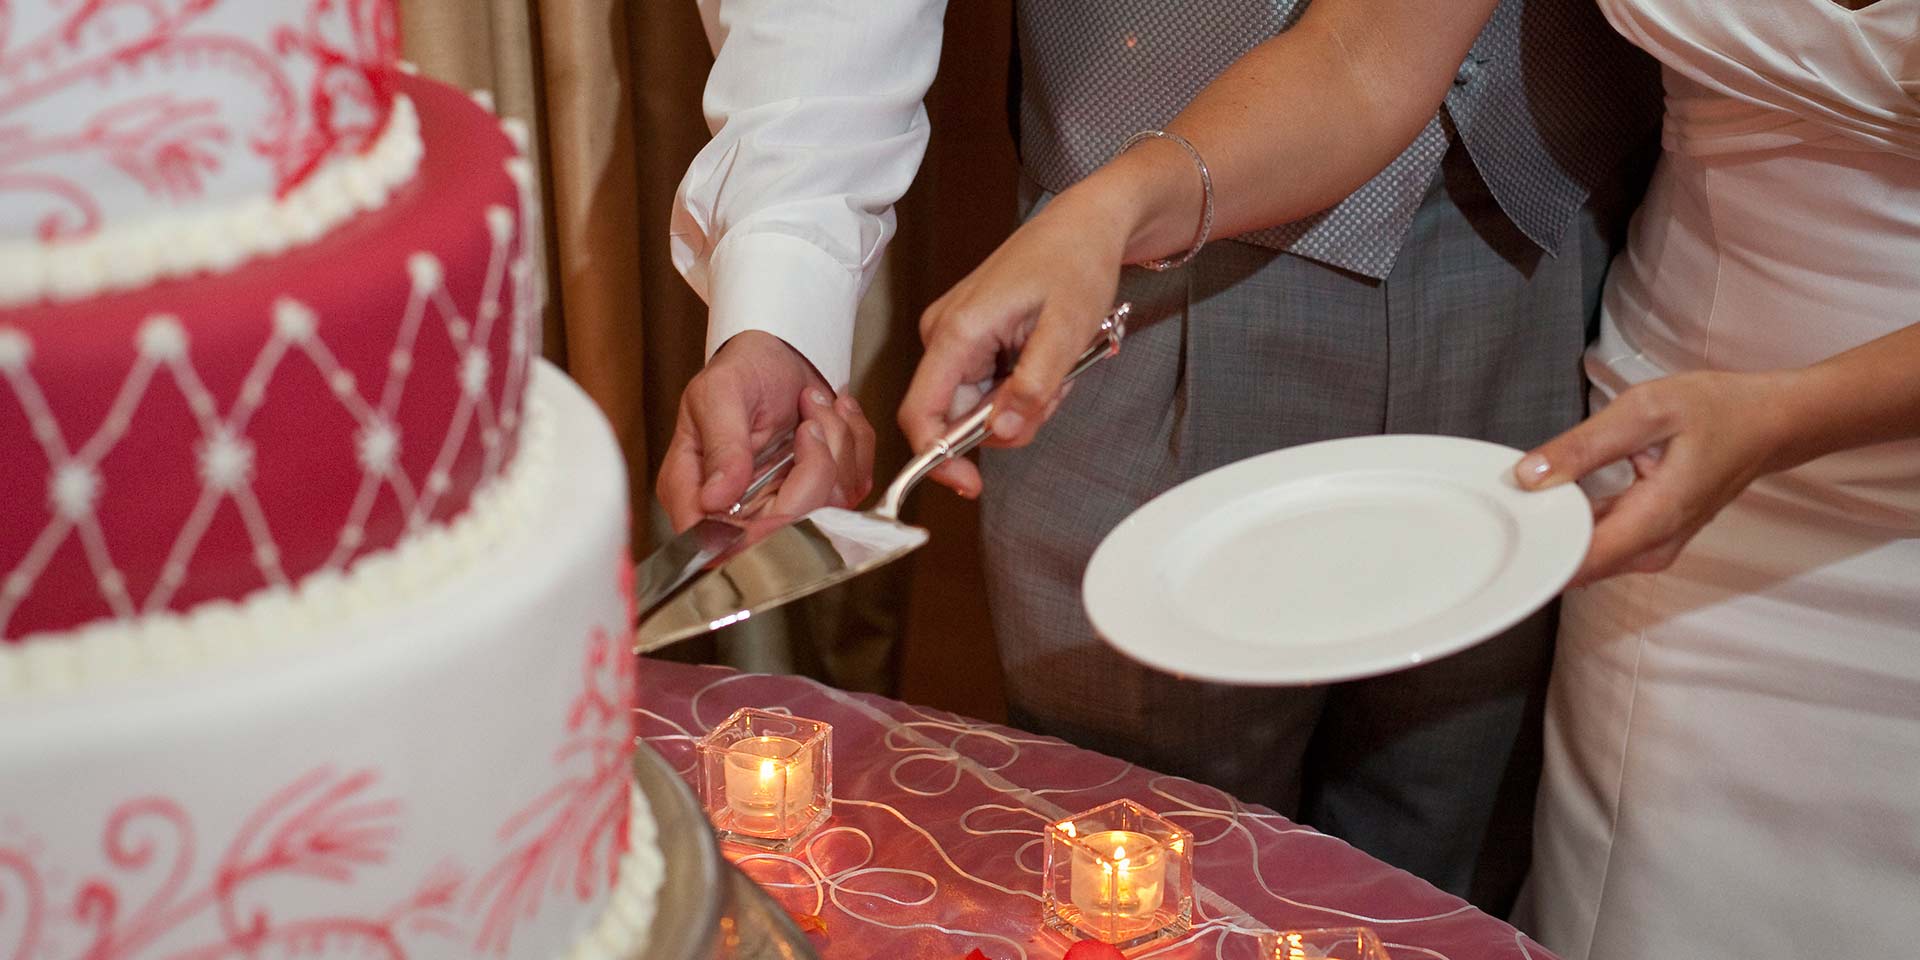 Couple cutting cake at a wedding.